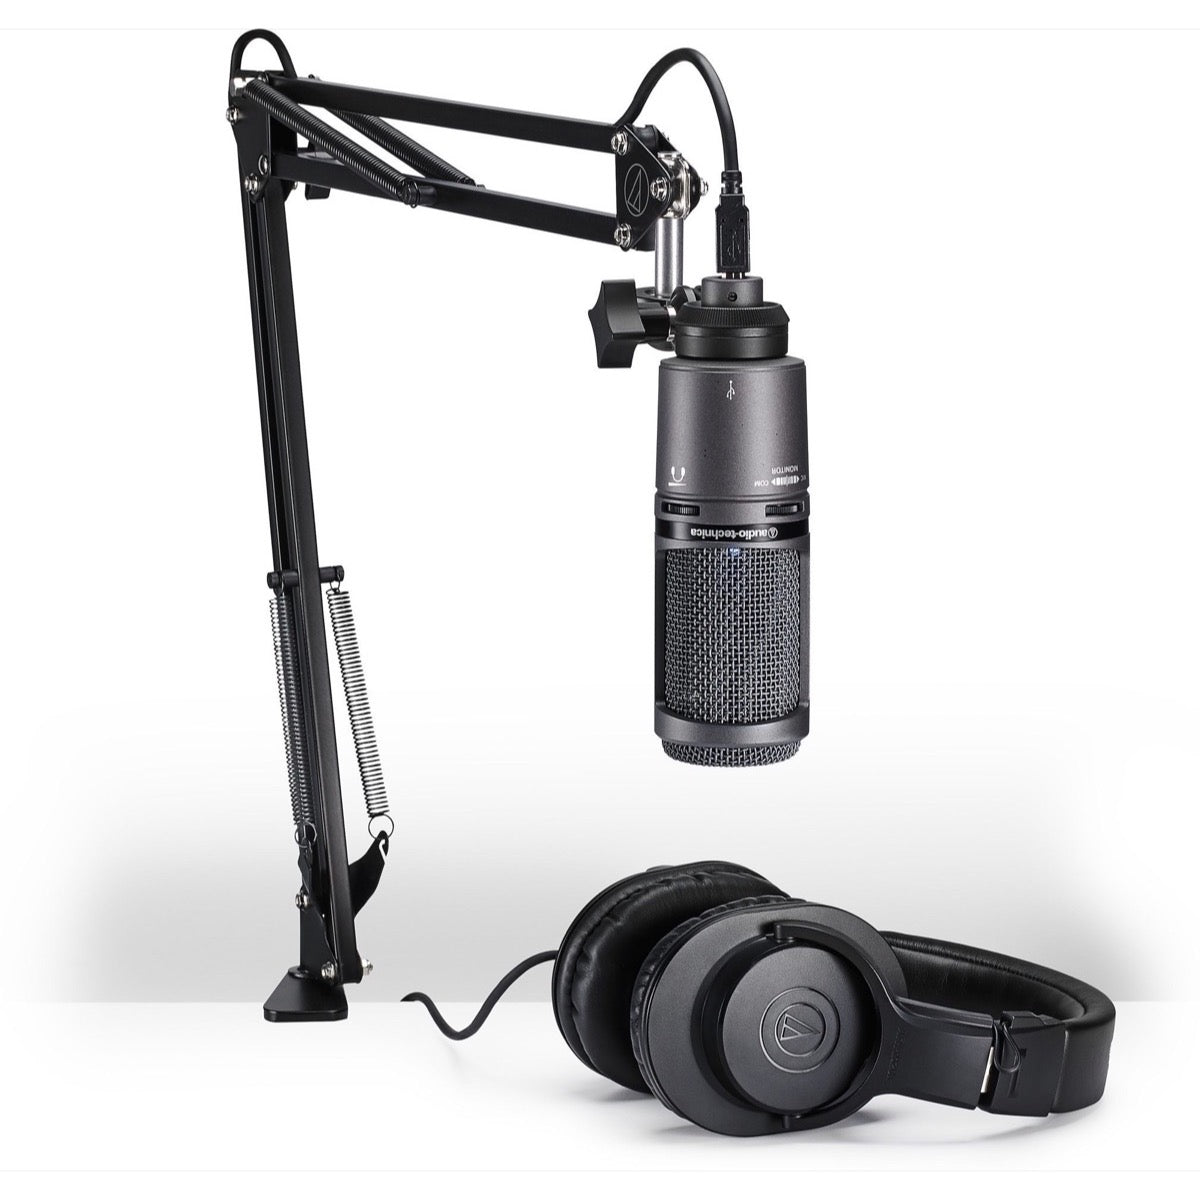 Audio-Technica AT2020 USB Plus Condenser Microphone, Pack with ATH-M20x Headphones and Desktop Boom Arm